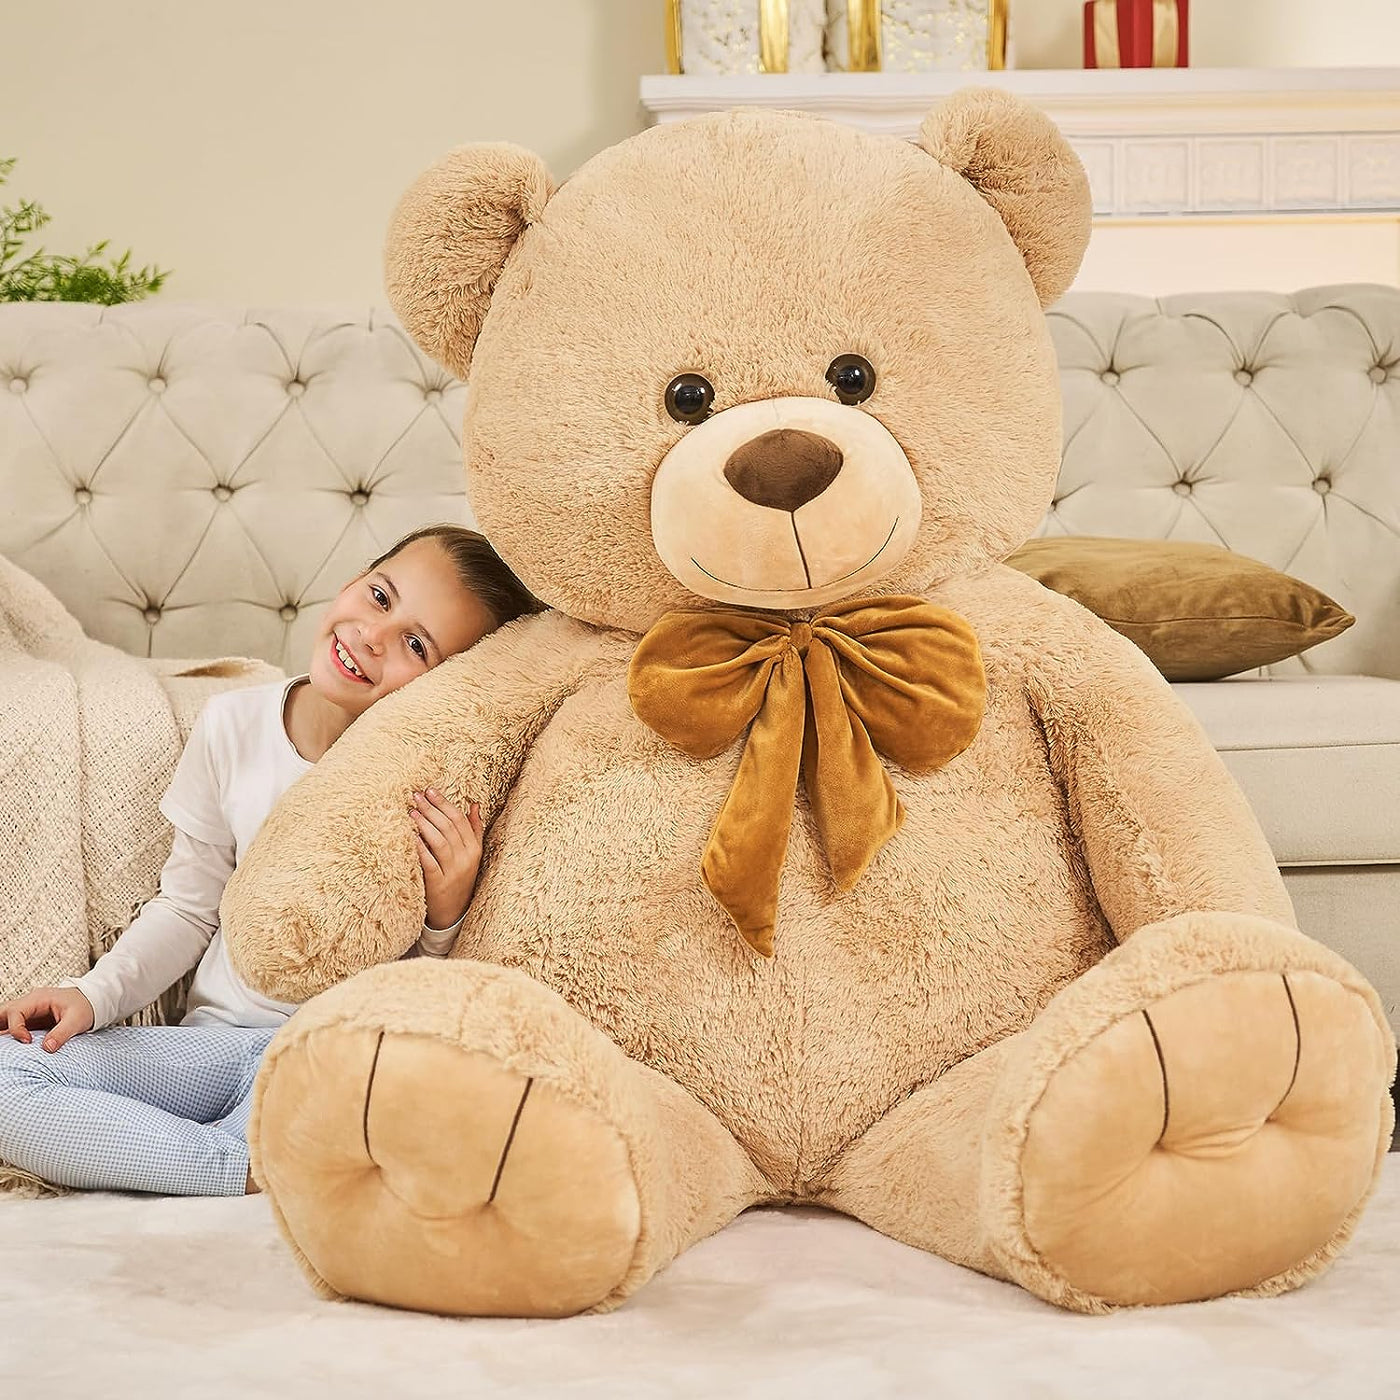 Giant Teddy Bear Plush Toy, Brown, 47/59 Inches